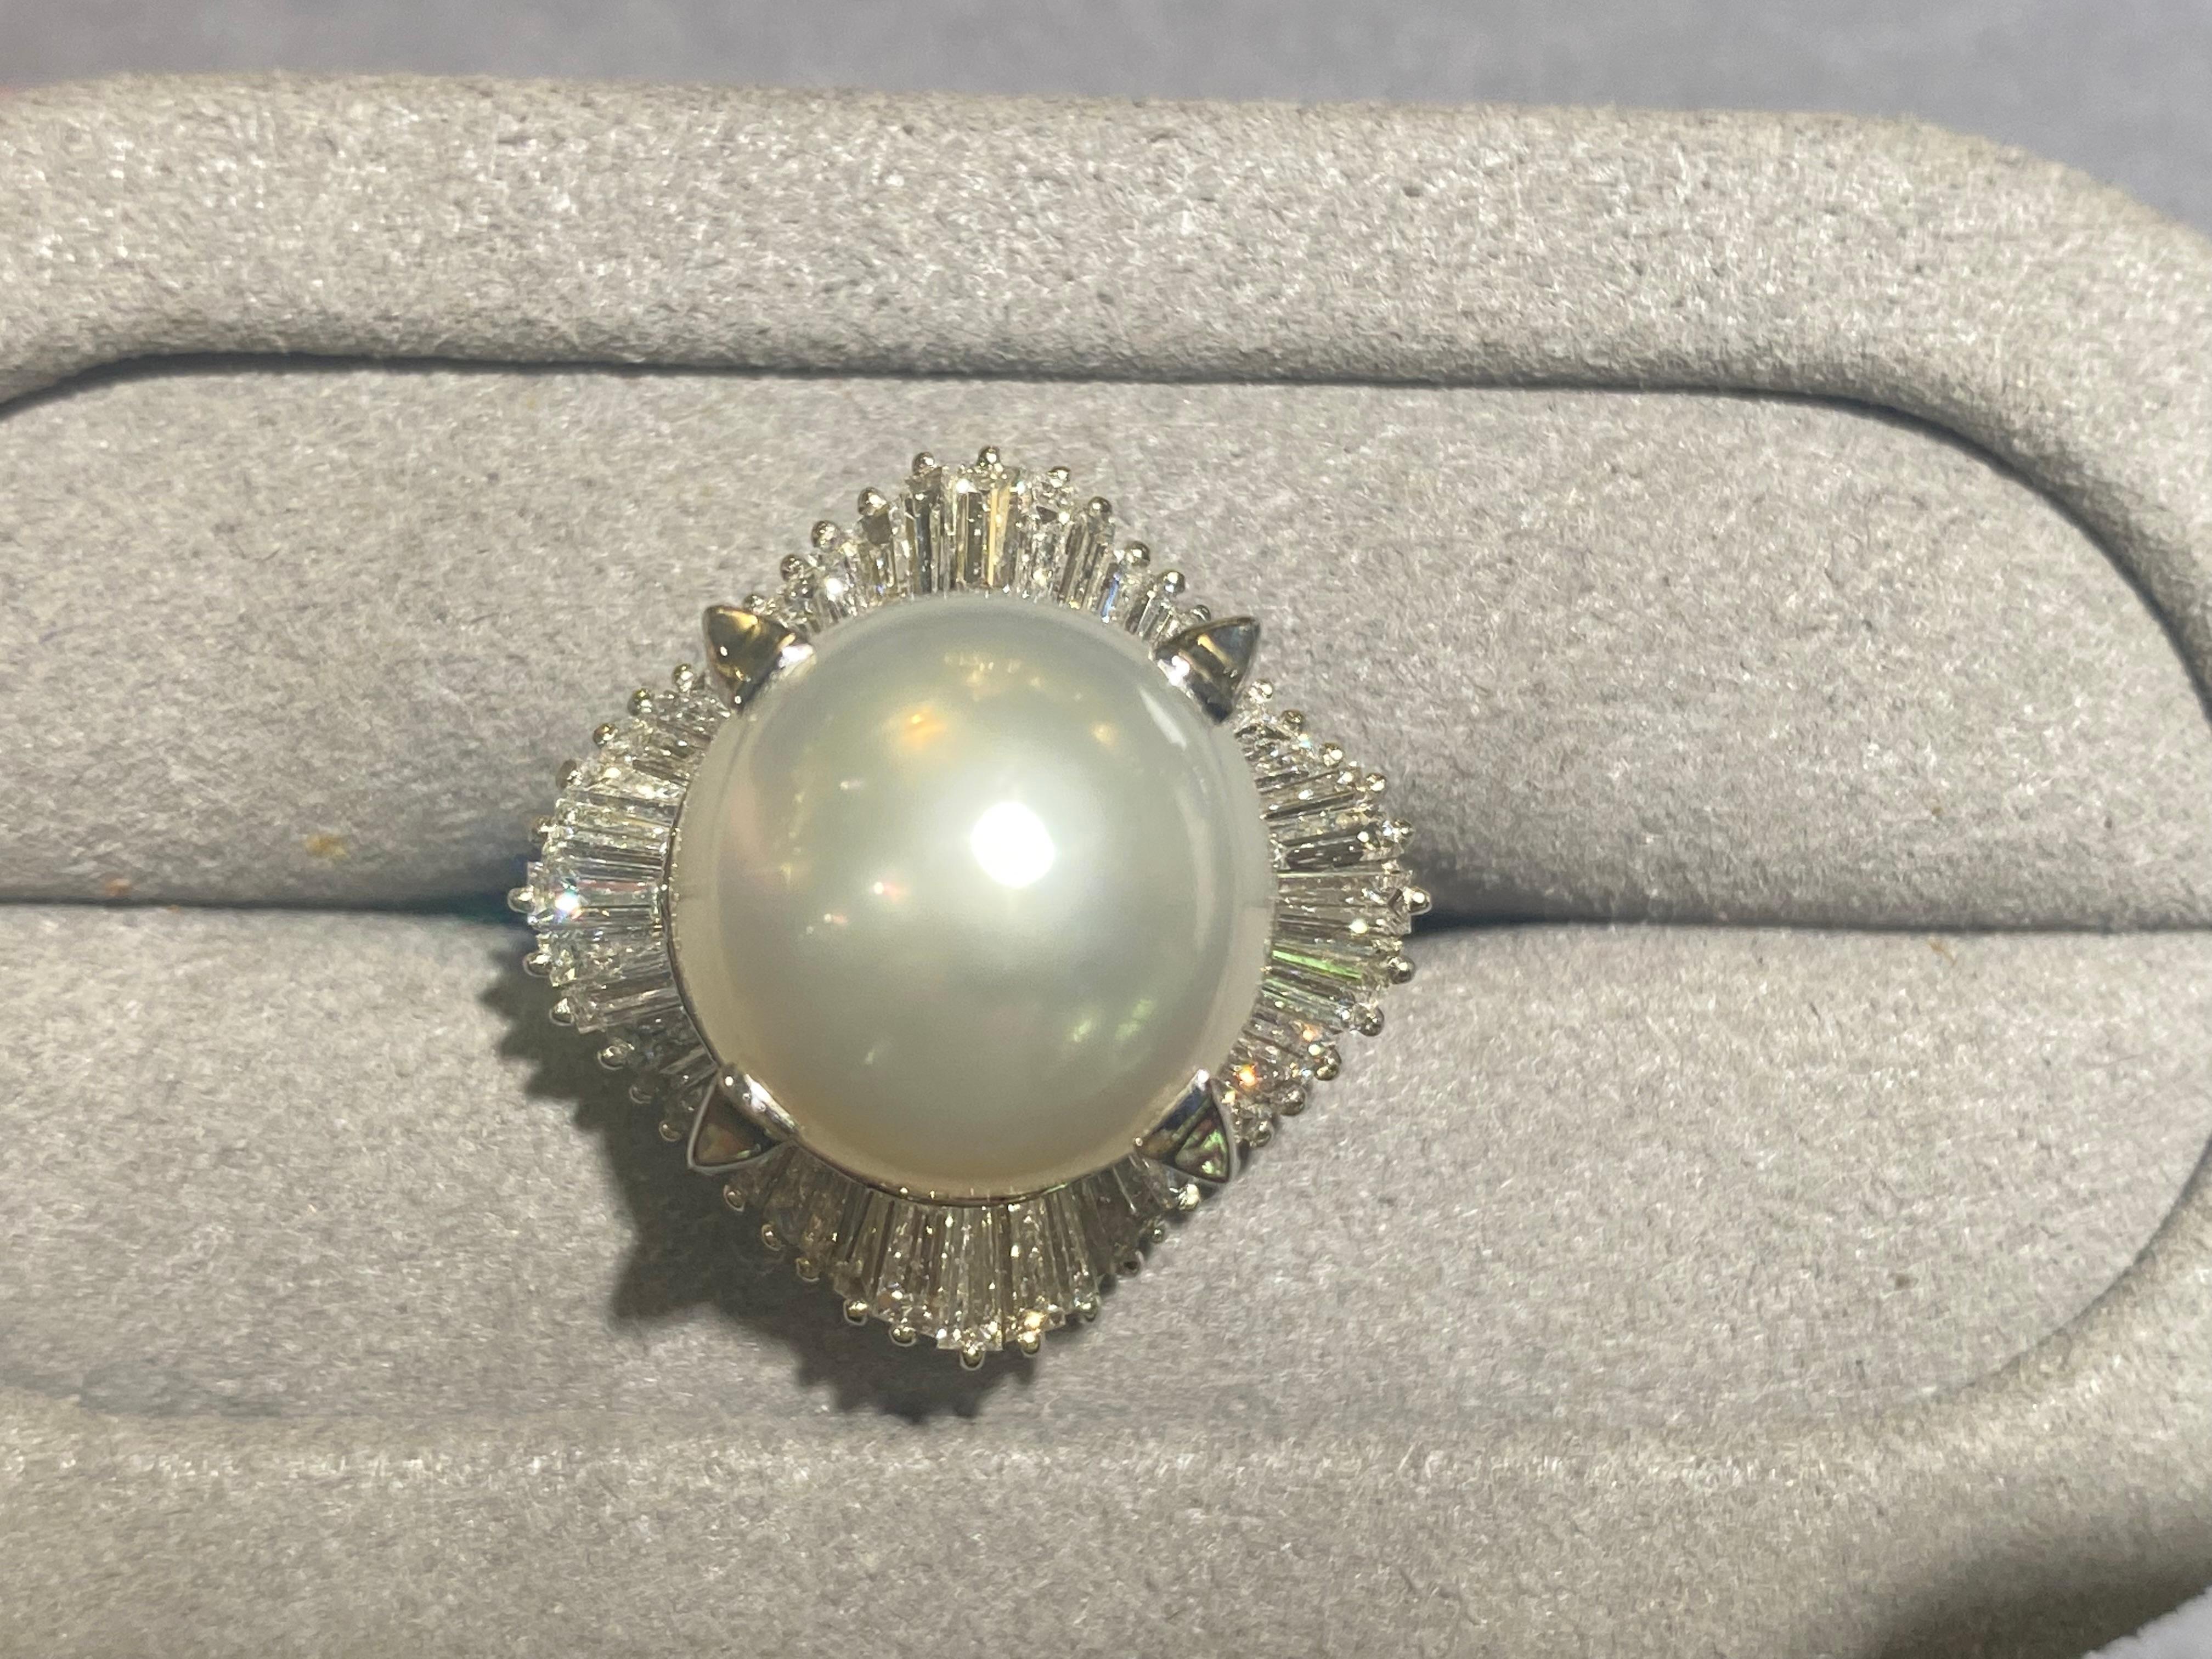 A 13.3 mm White Australian South Sea Pearl and Diamond Ring in Pt 900 Platinum. The White Australian South Sea pearl is secured by 4 long claws that are rising from the surface of the ballerina set baguette diamonds. It is a big statement pearl ring